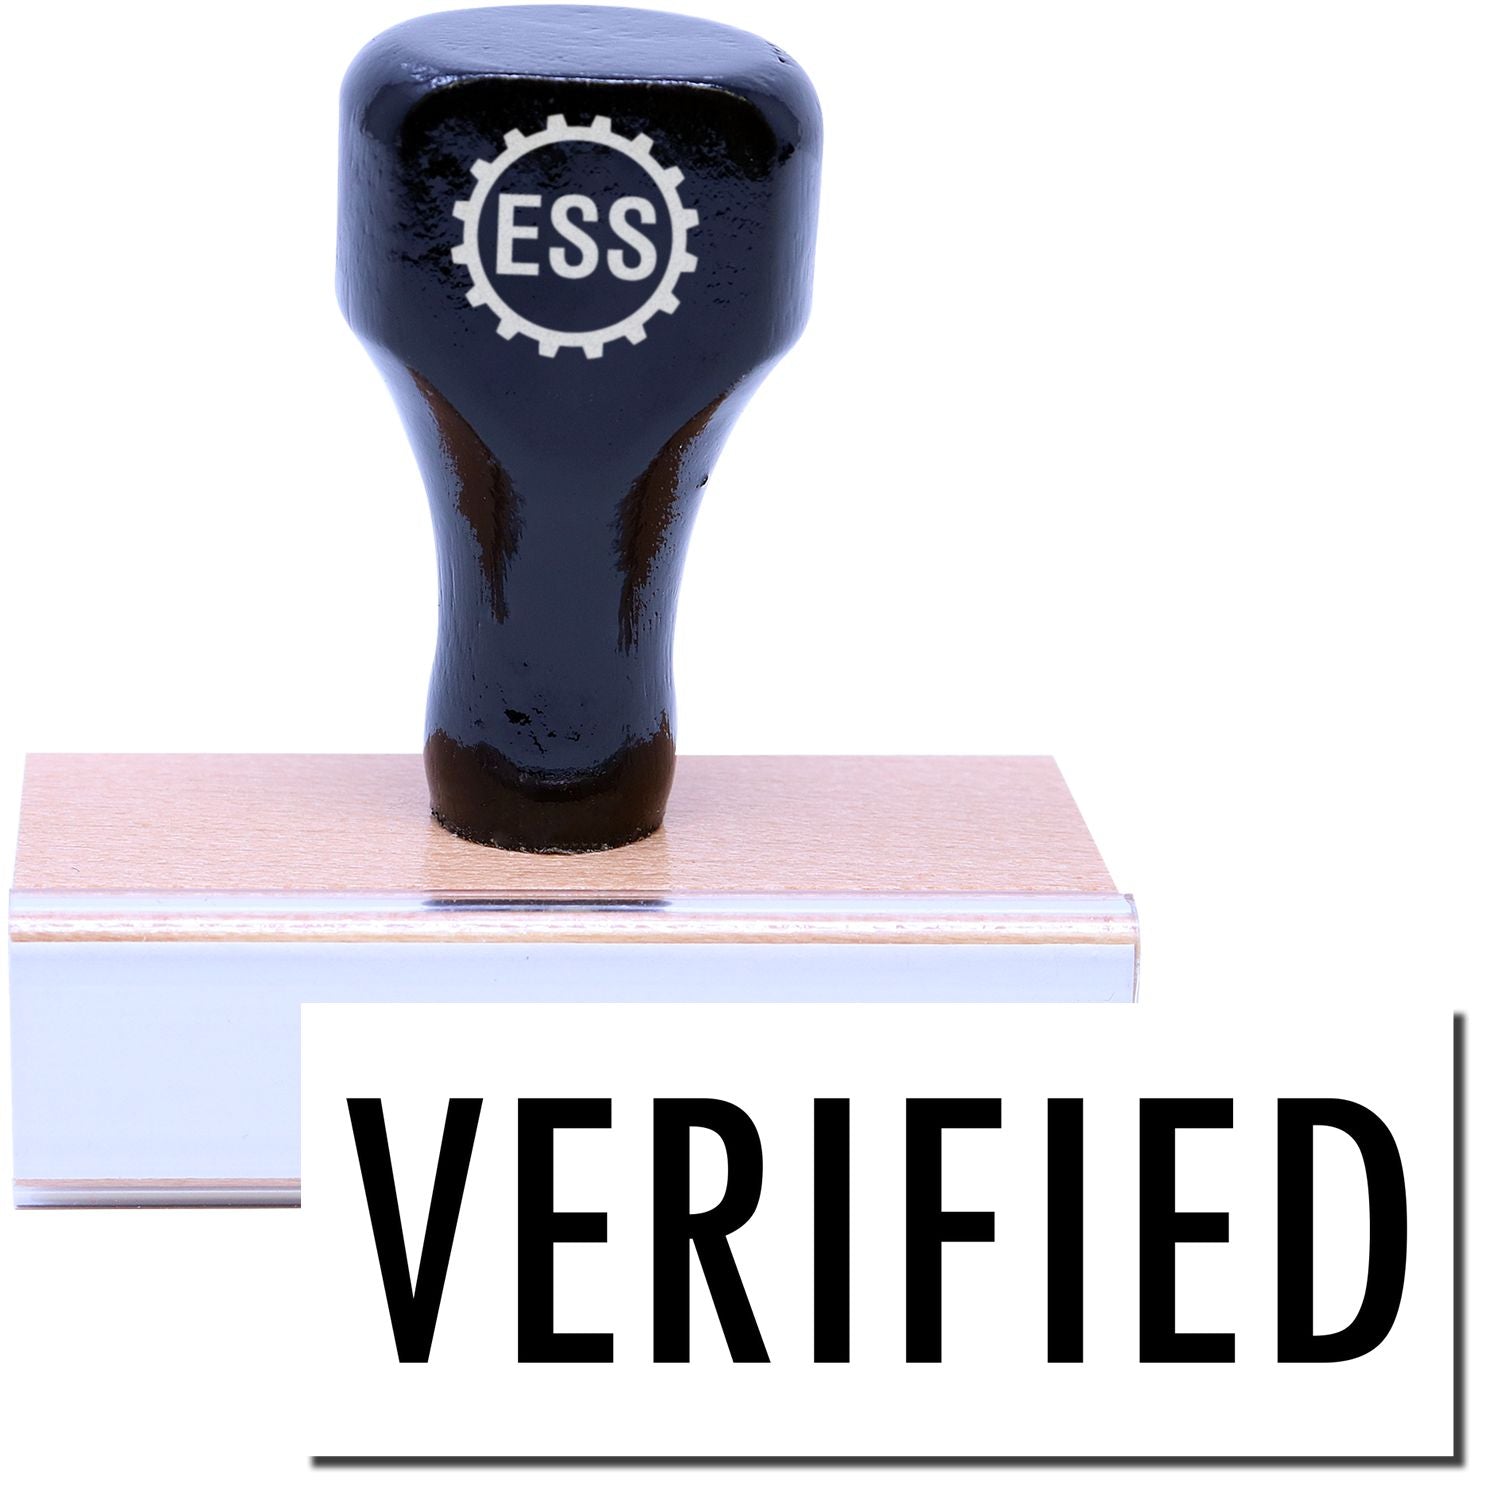 A stock office rubber stamp with a stamped image showing how the text "VERIFIED" is displayed after stamping.